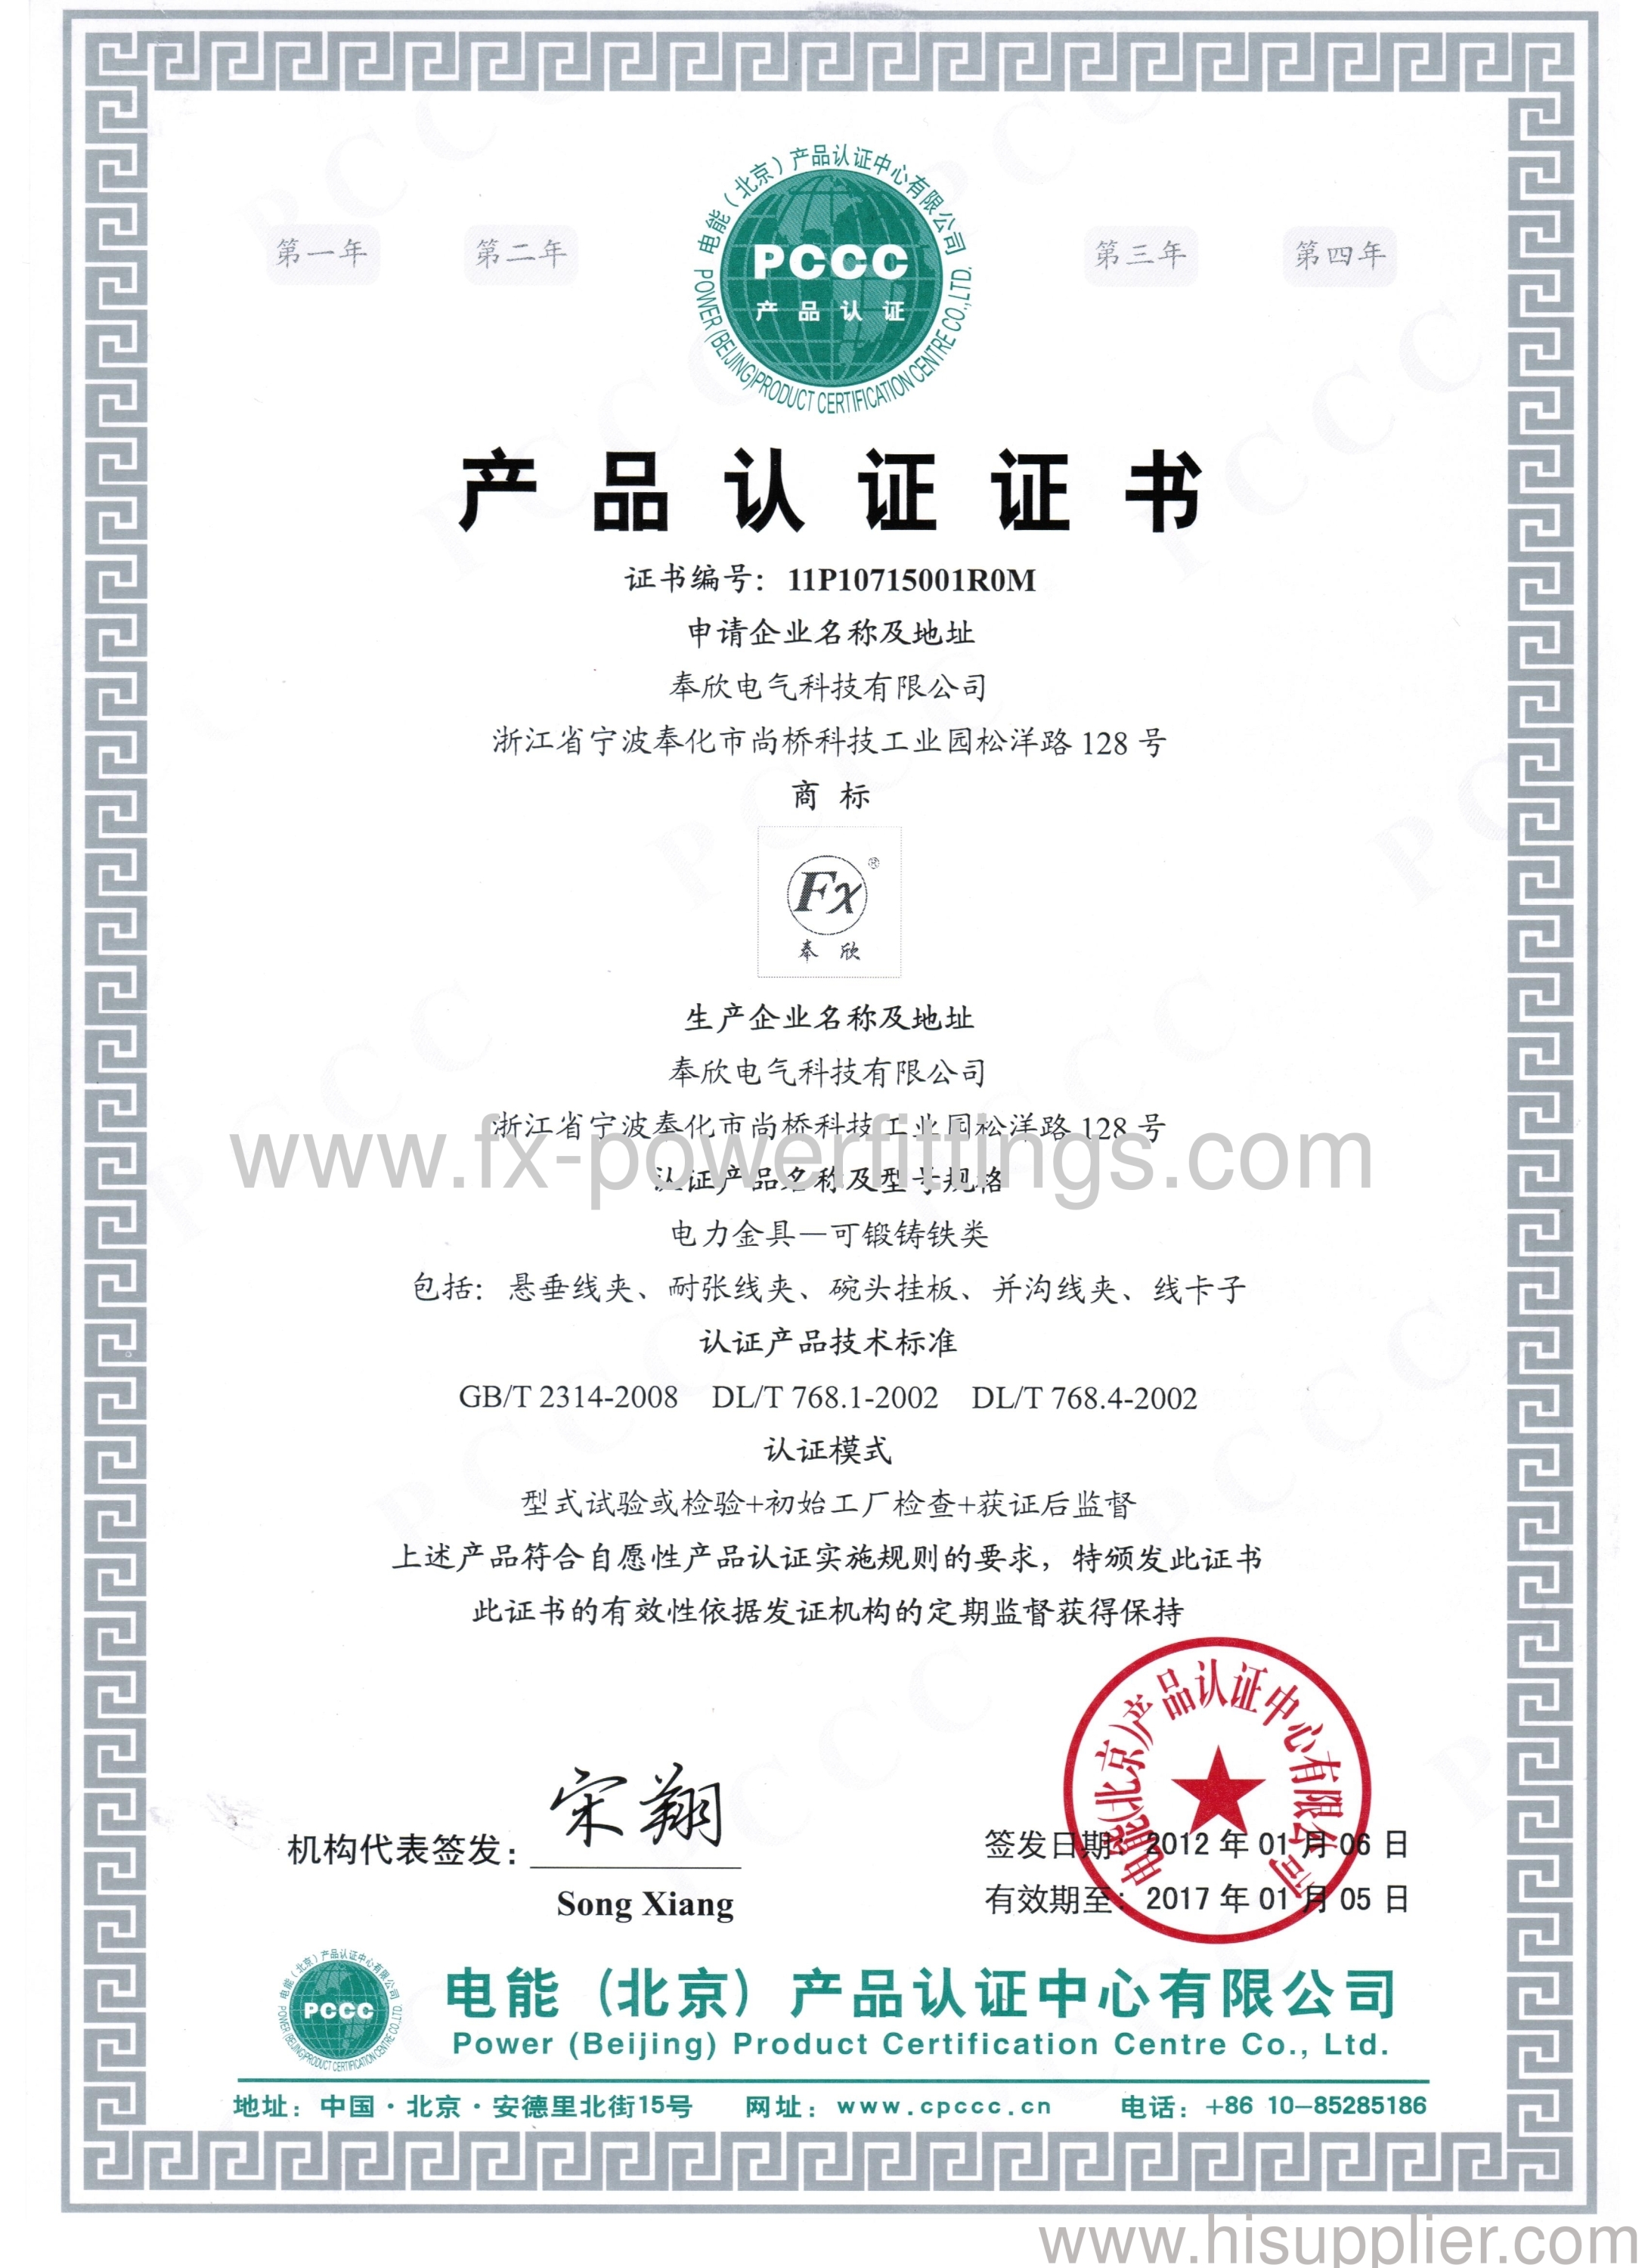 certificate of energy conservation